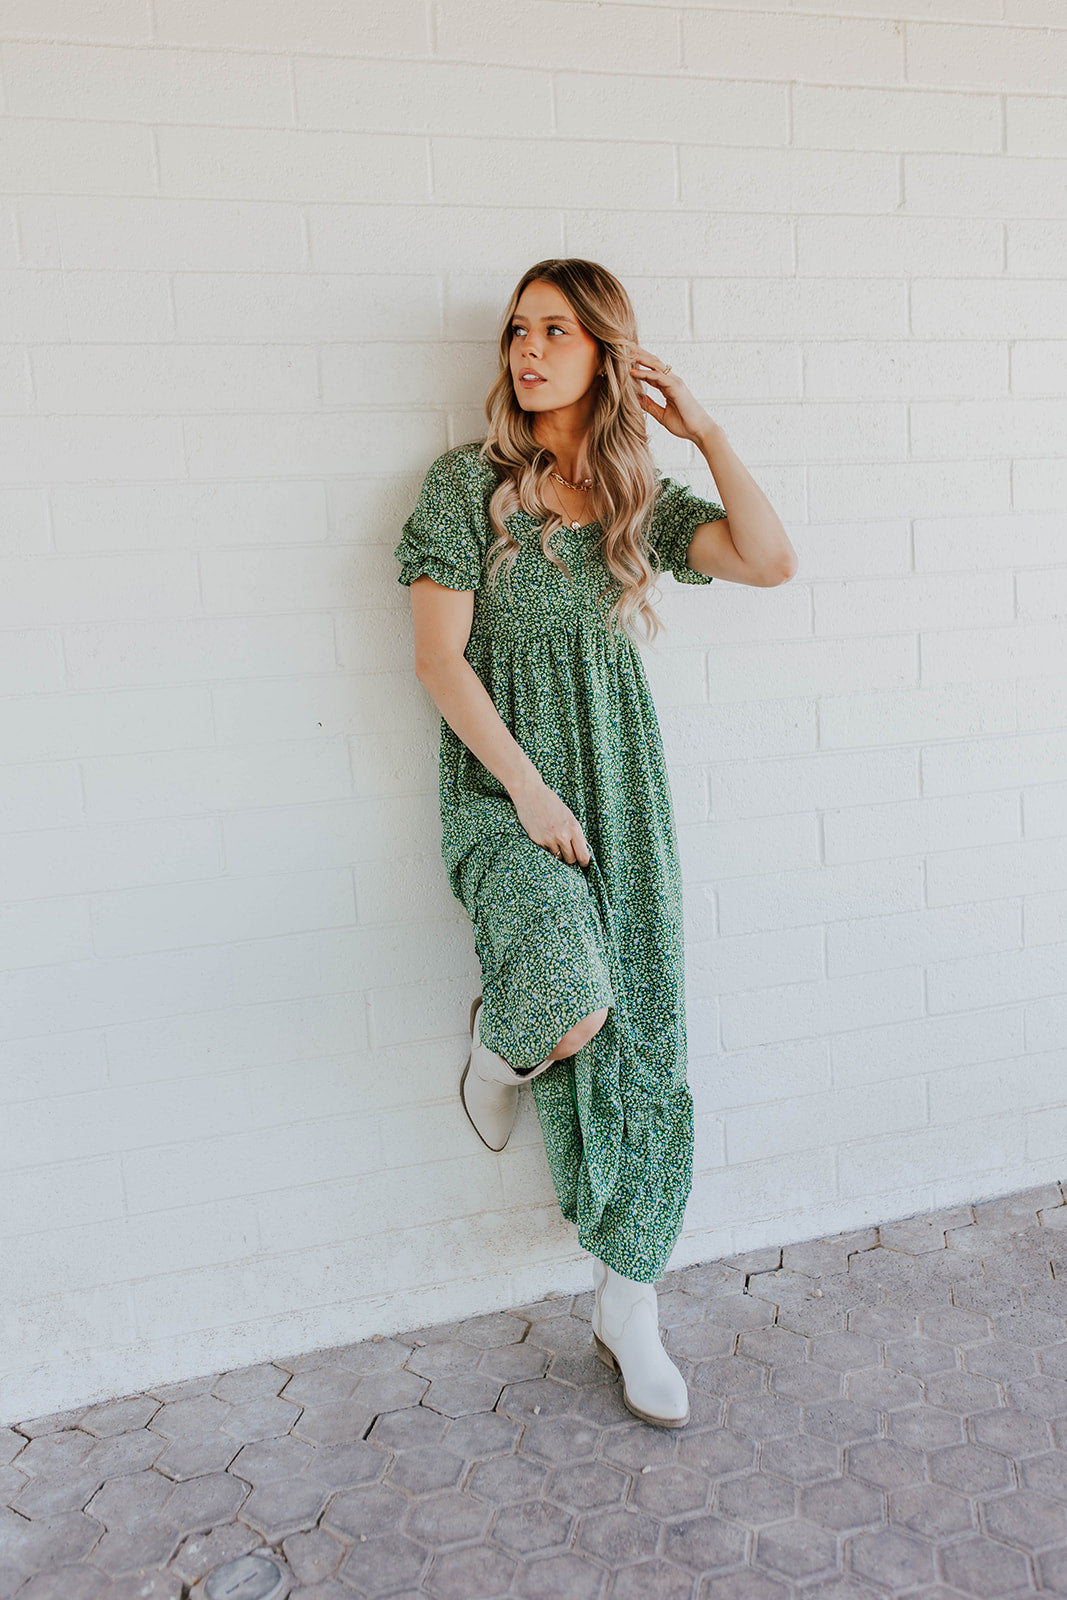 THE EMMALINE DRESS IN PINE GREEN FLORAL BY PINK DESERT